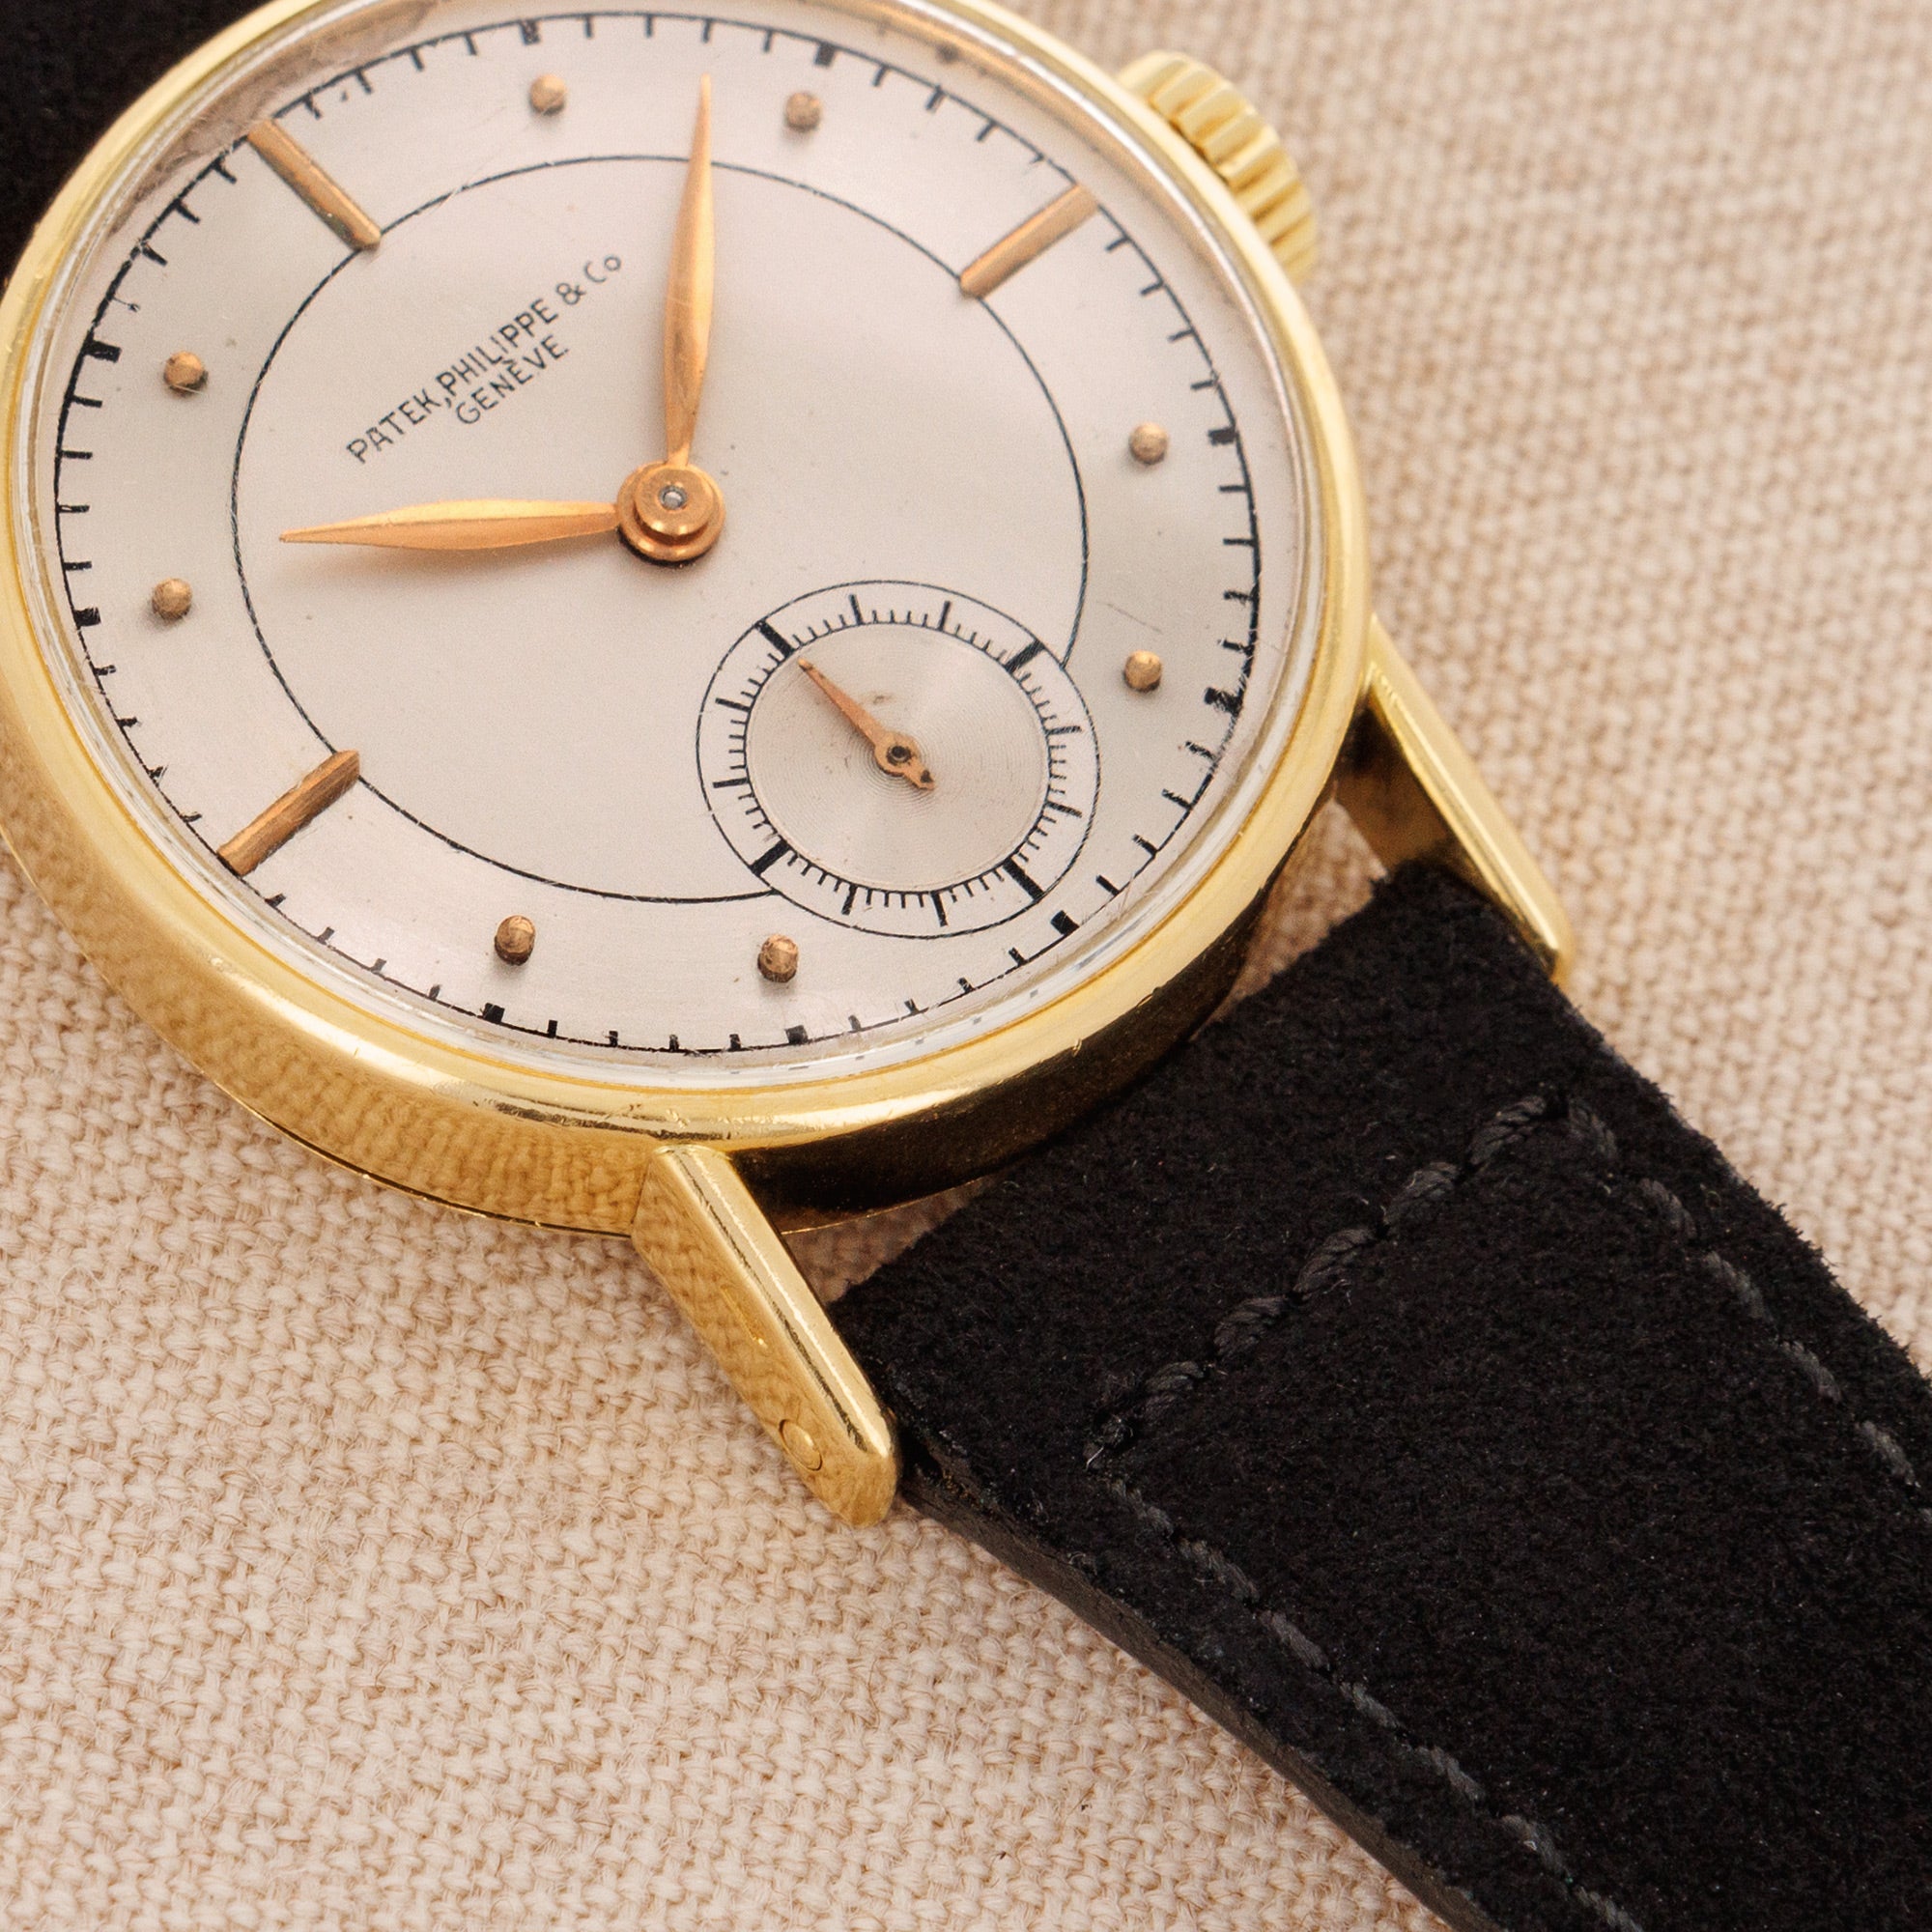 Patek Philippe - Patek Philippe Yellow Gold Calatrava Ref. 534 with Silver Sector Dial - The Keystone Watches